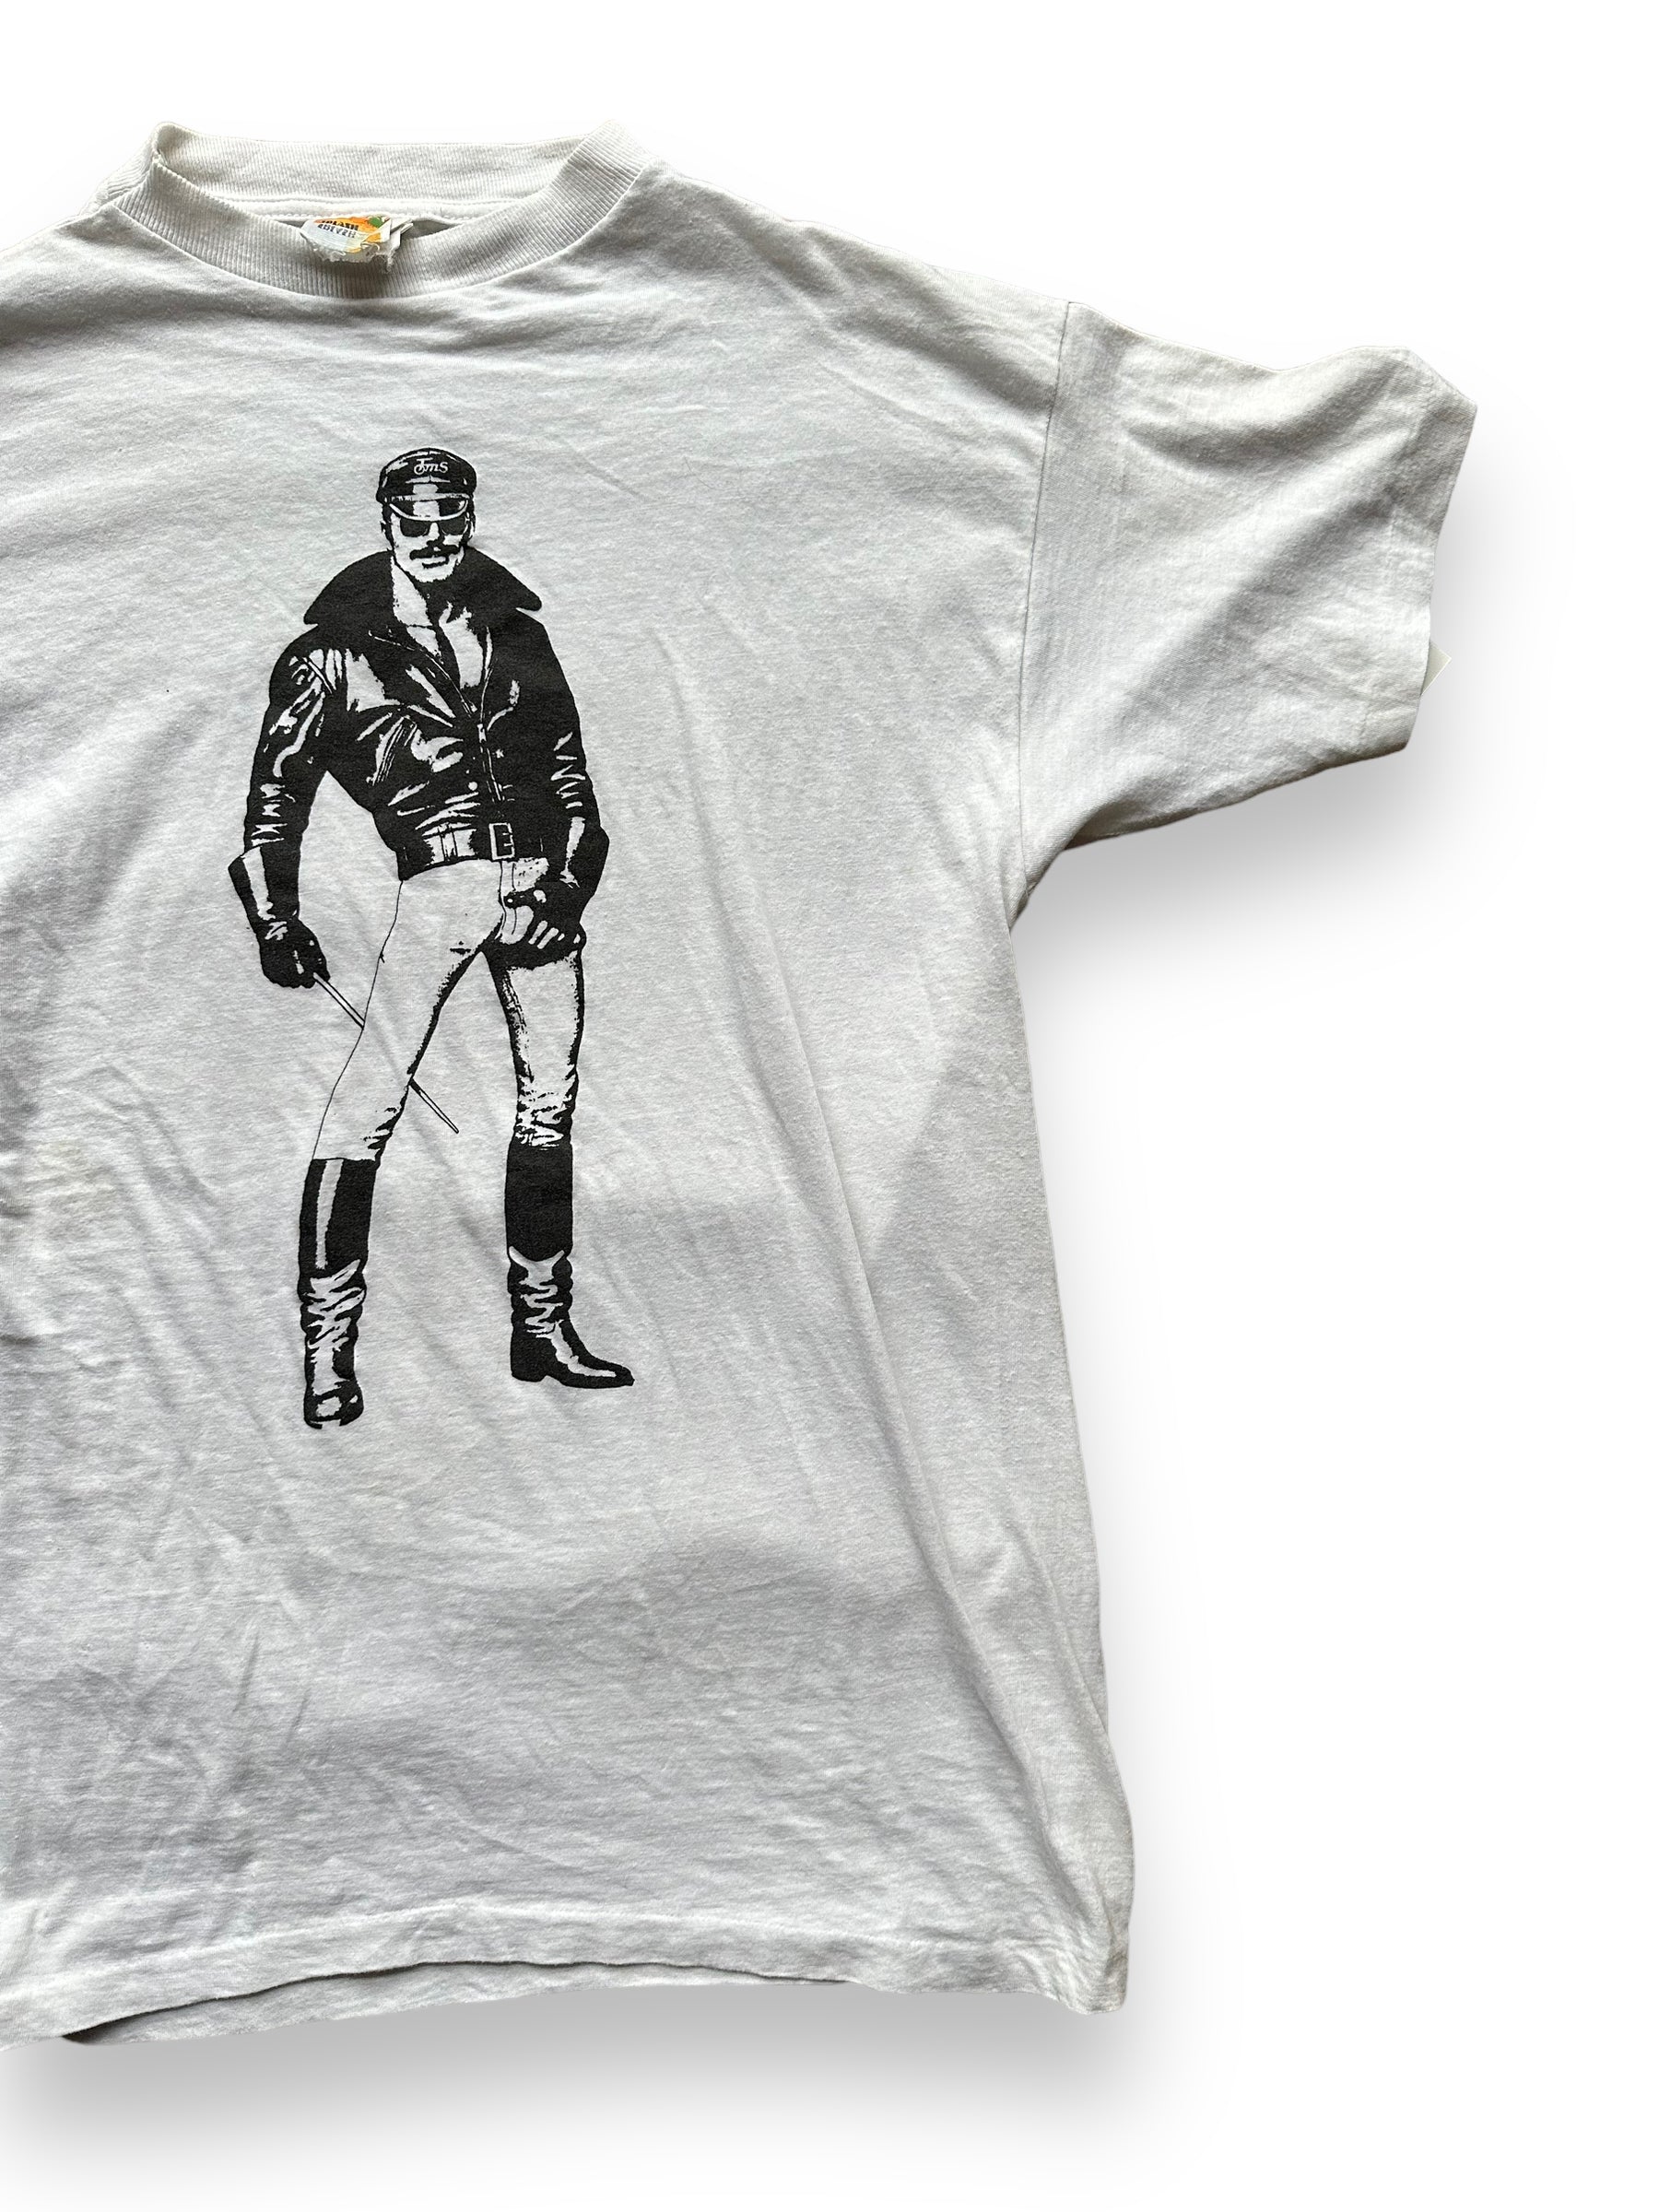 Front Left View of Vintage Tom of Finland Tee SZ L | Vintage Leather Daddy Tees Tees Seattle | Barn Owl Vintage Tees Seattle